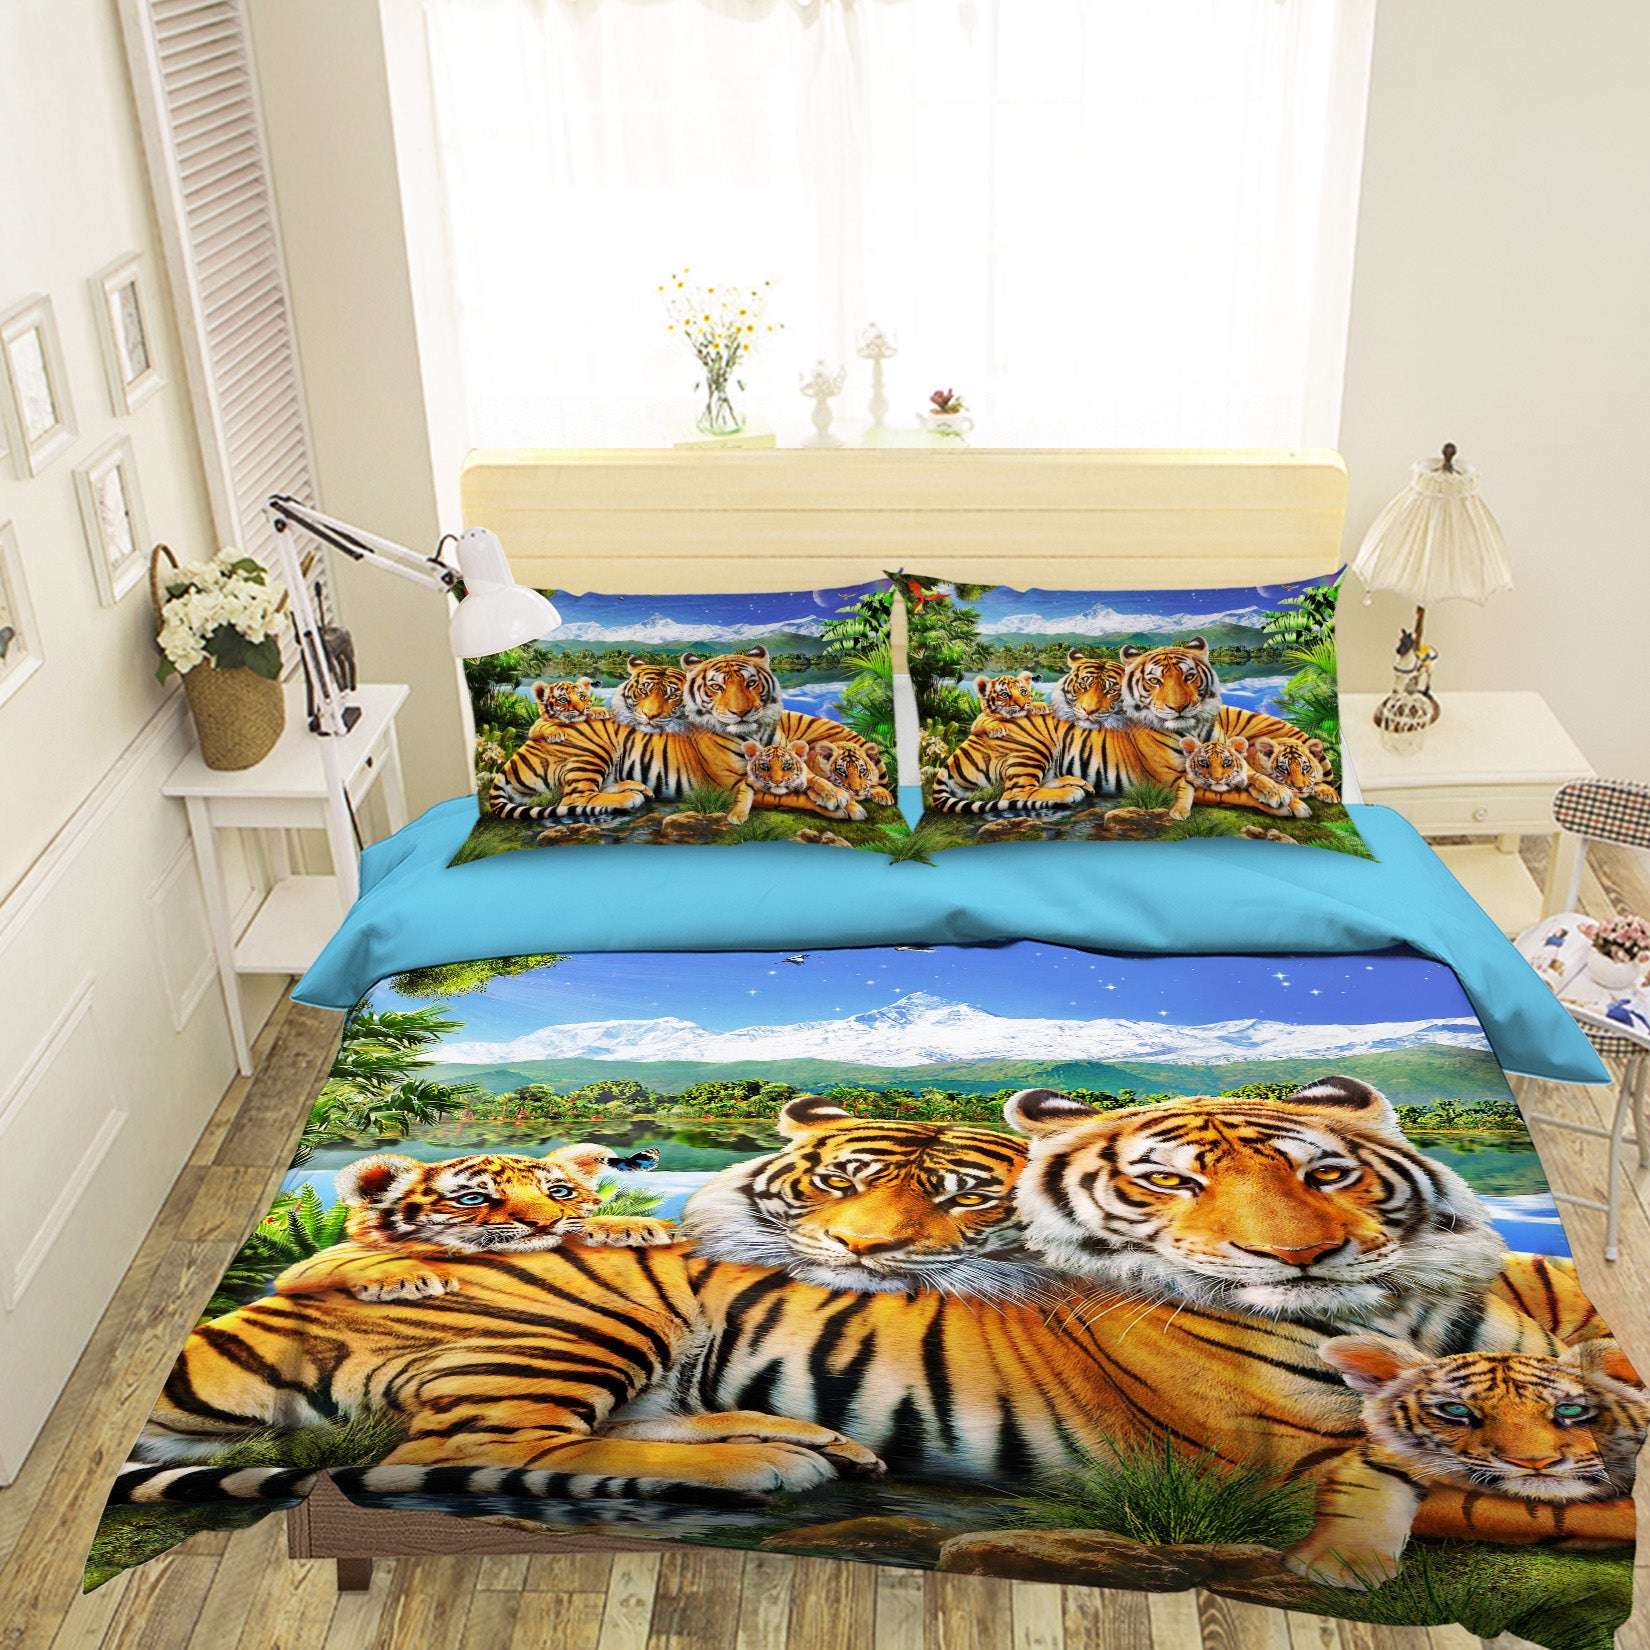 3D Loving Tigers 2121 Adrian Chesterman Bedding Bed Pillowcases Quilt